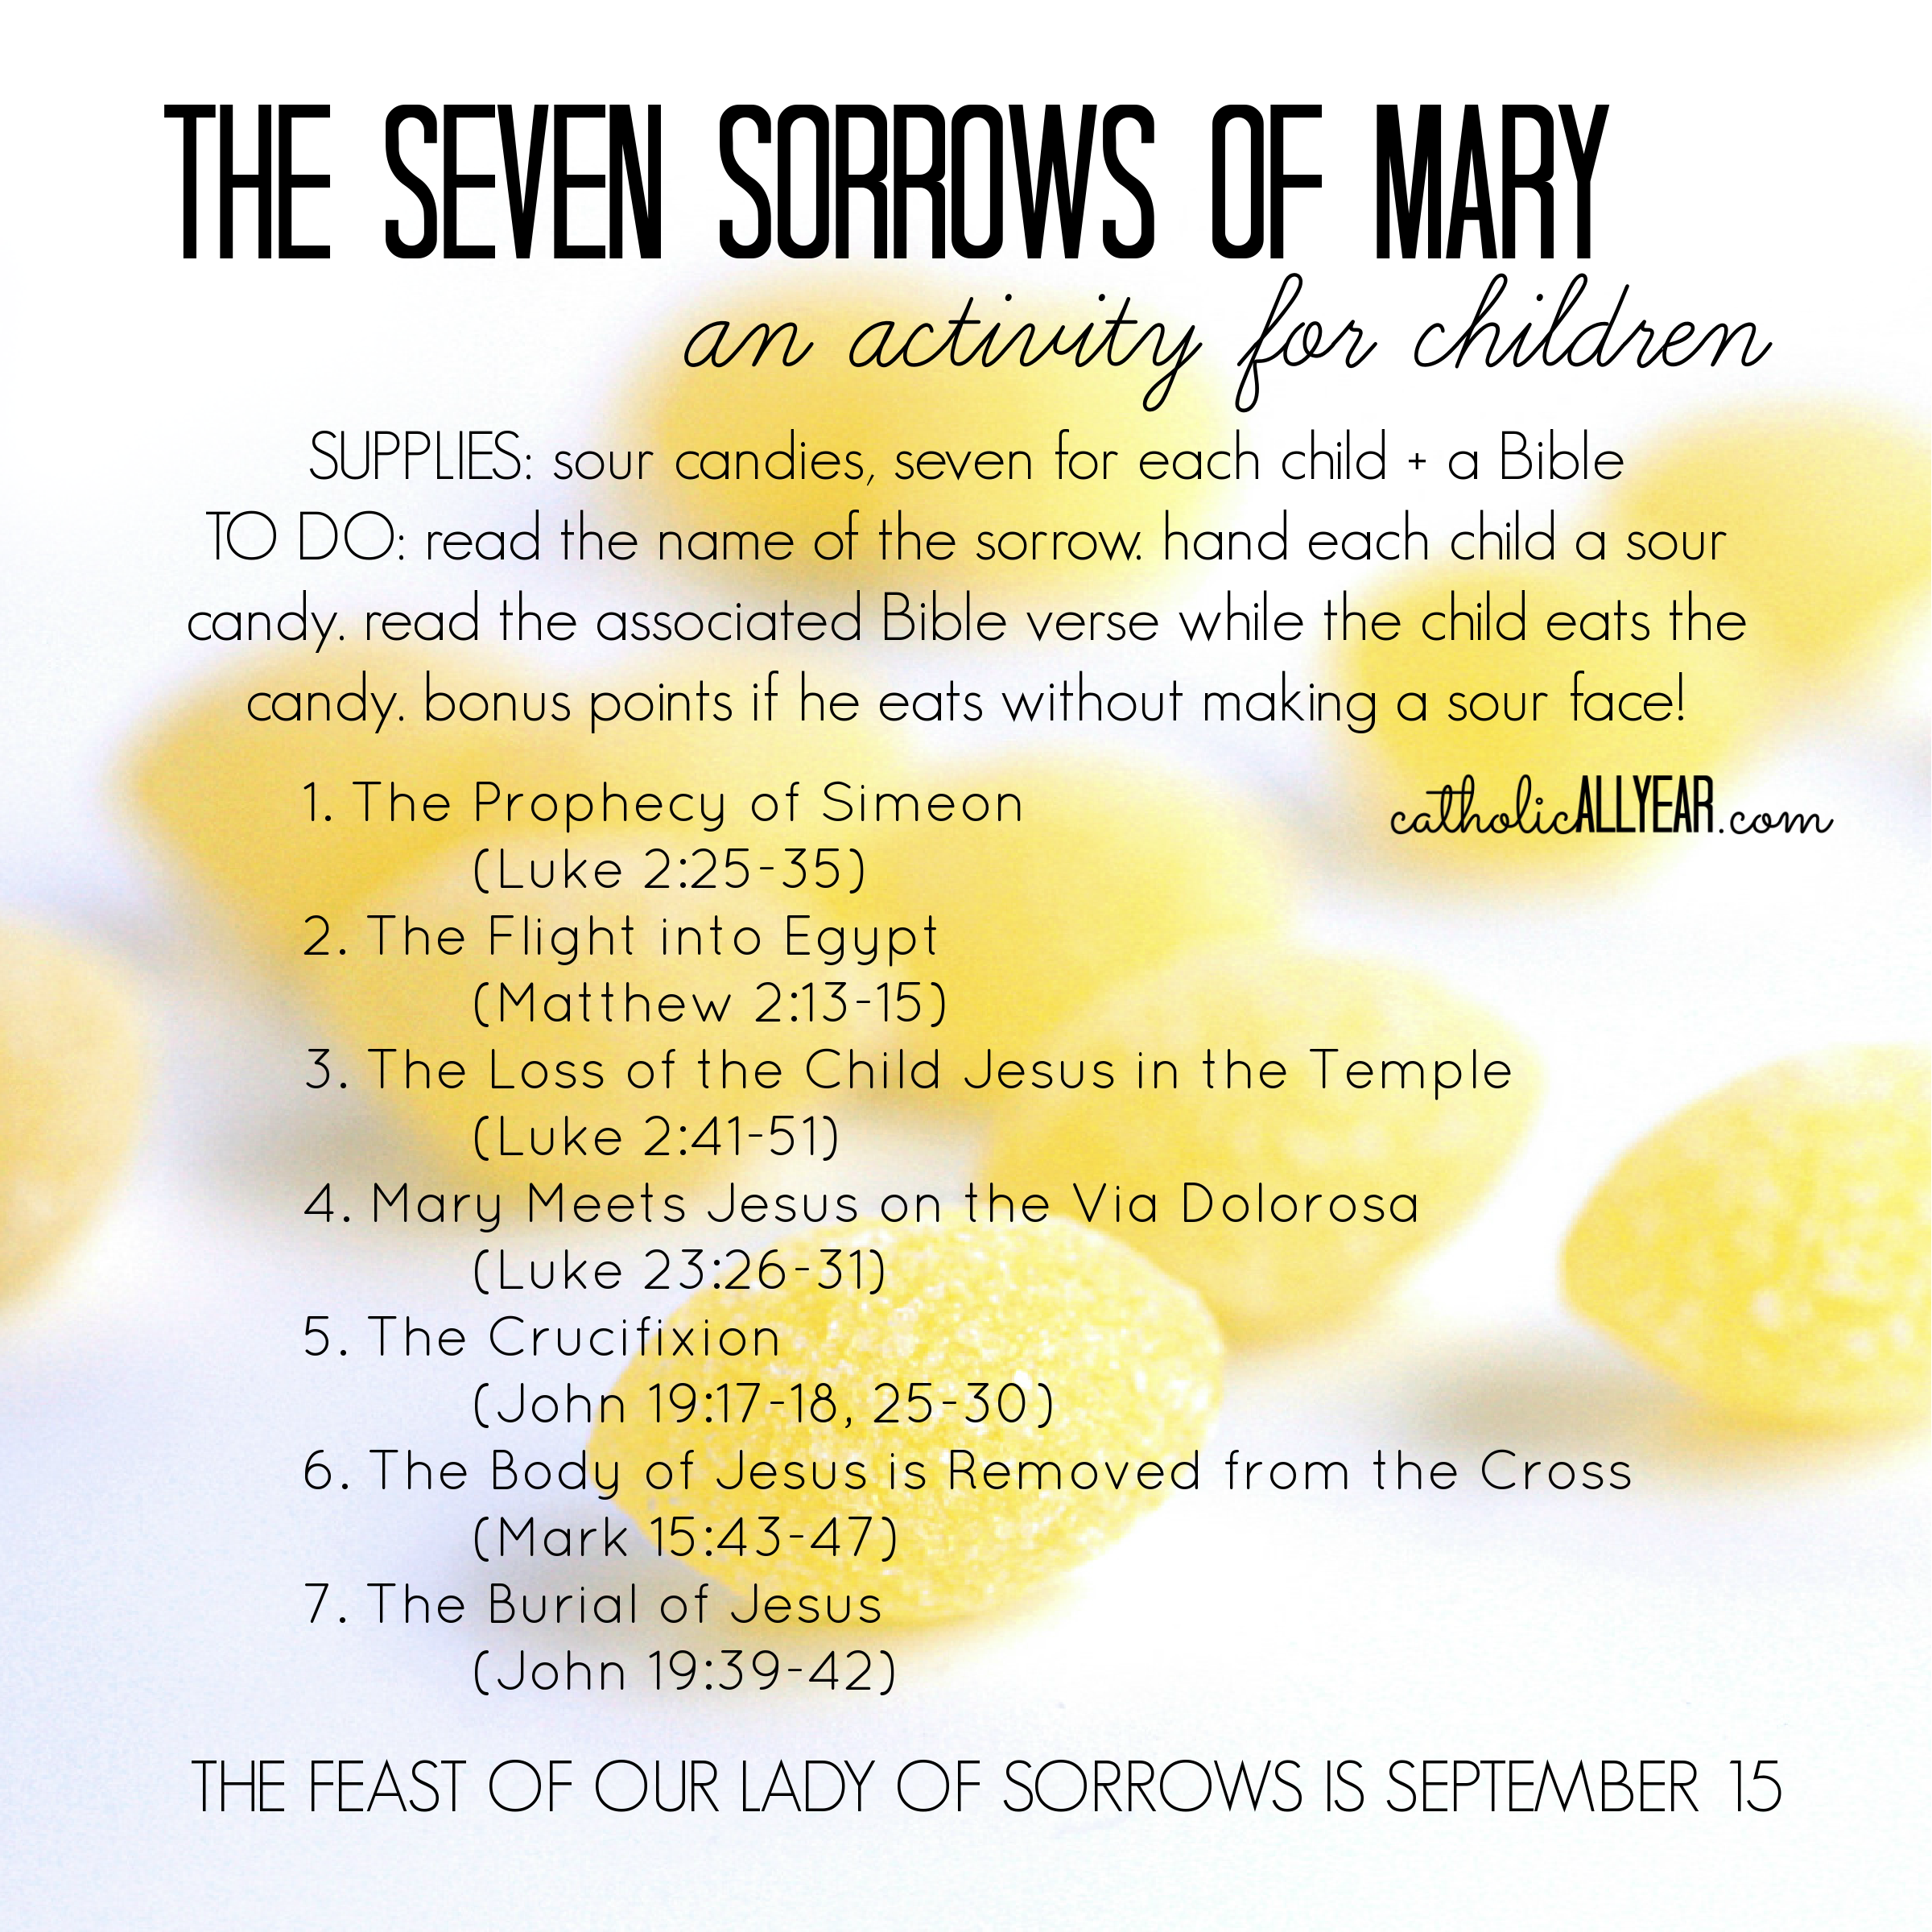 The Seven Sorrows of Mary: an activity for children